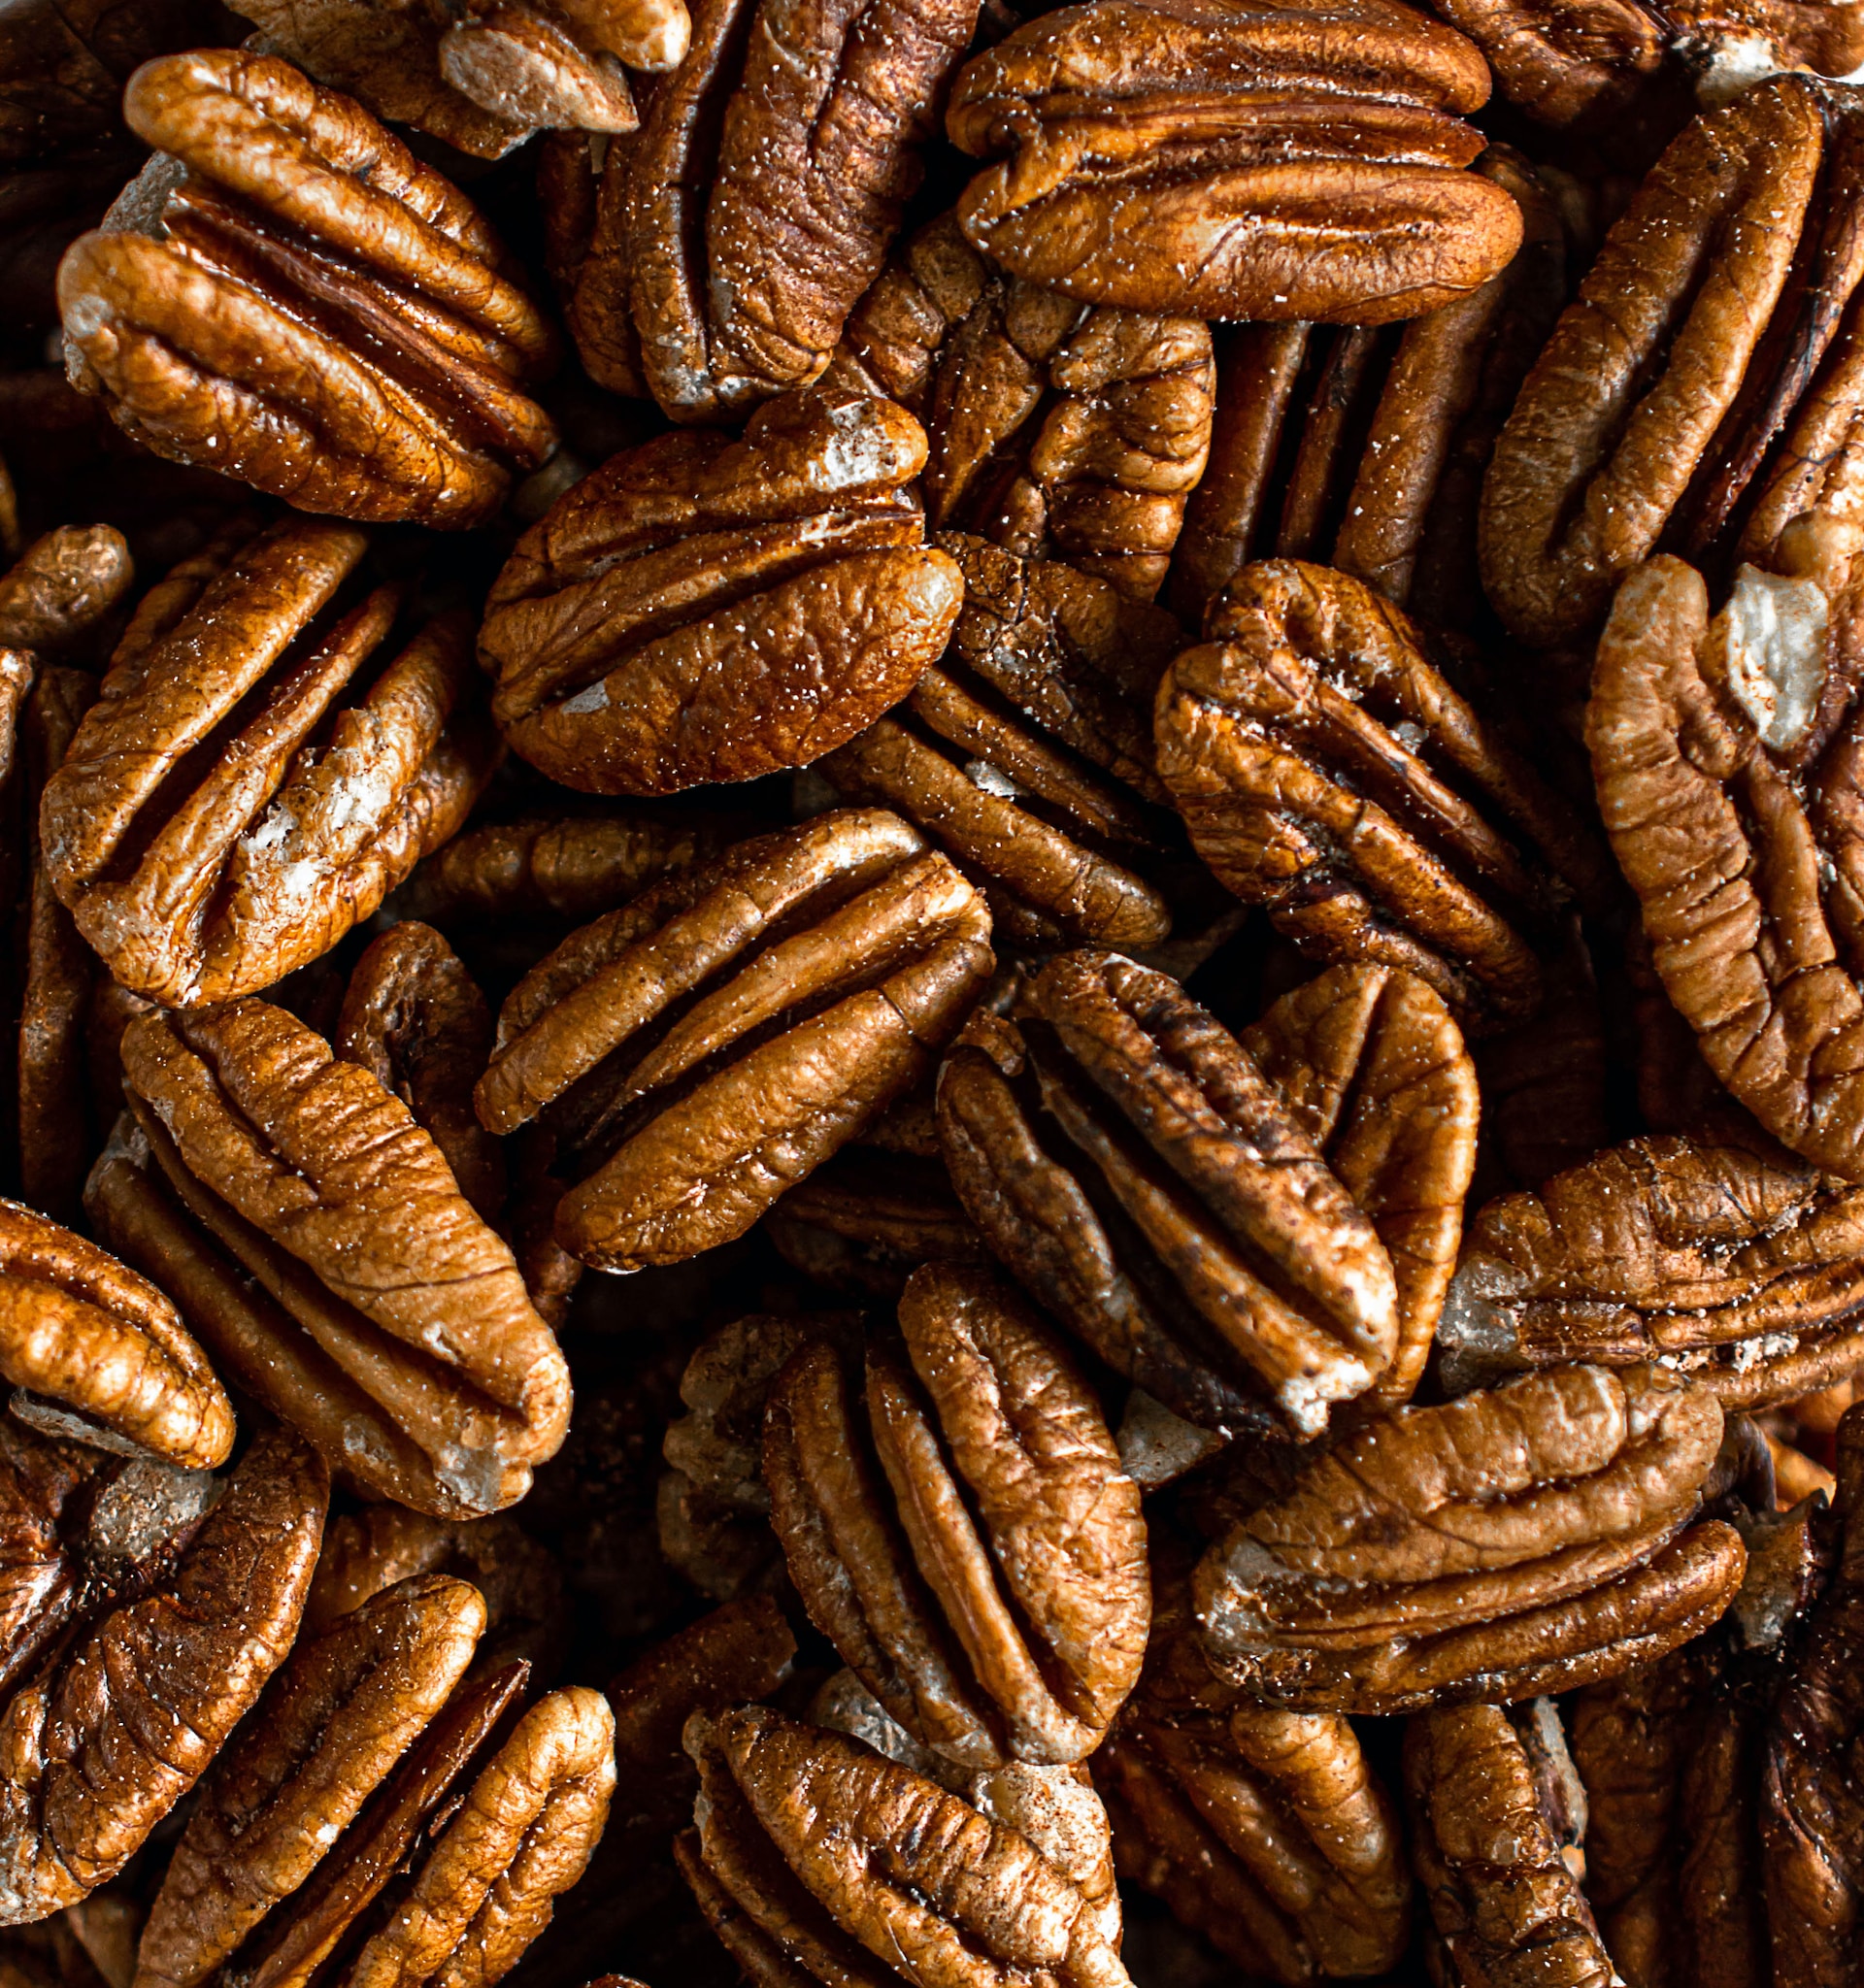 Discover the Rich and Nutty Flavor of Texas Hill Country Pecan by Katz Coffee